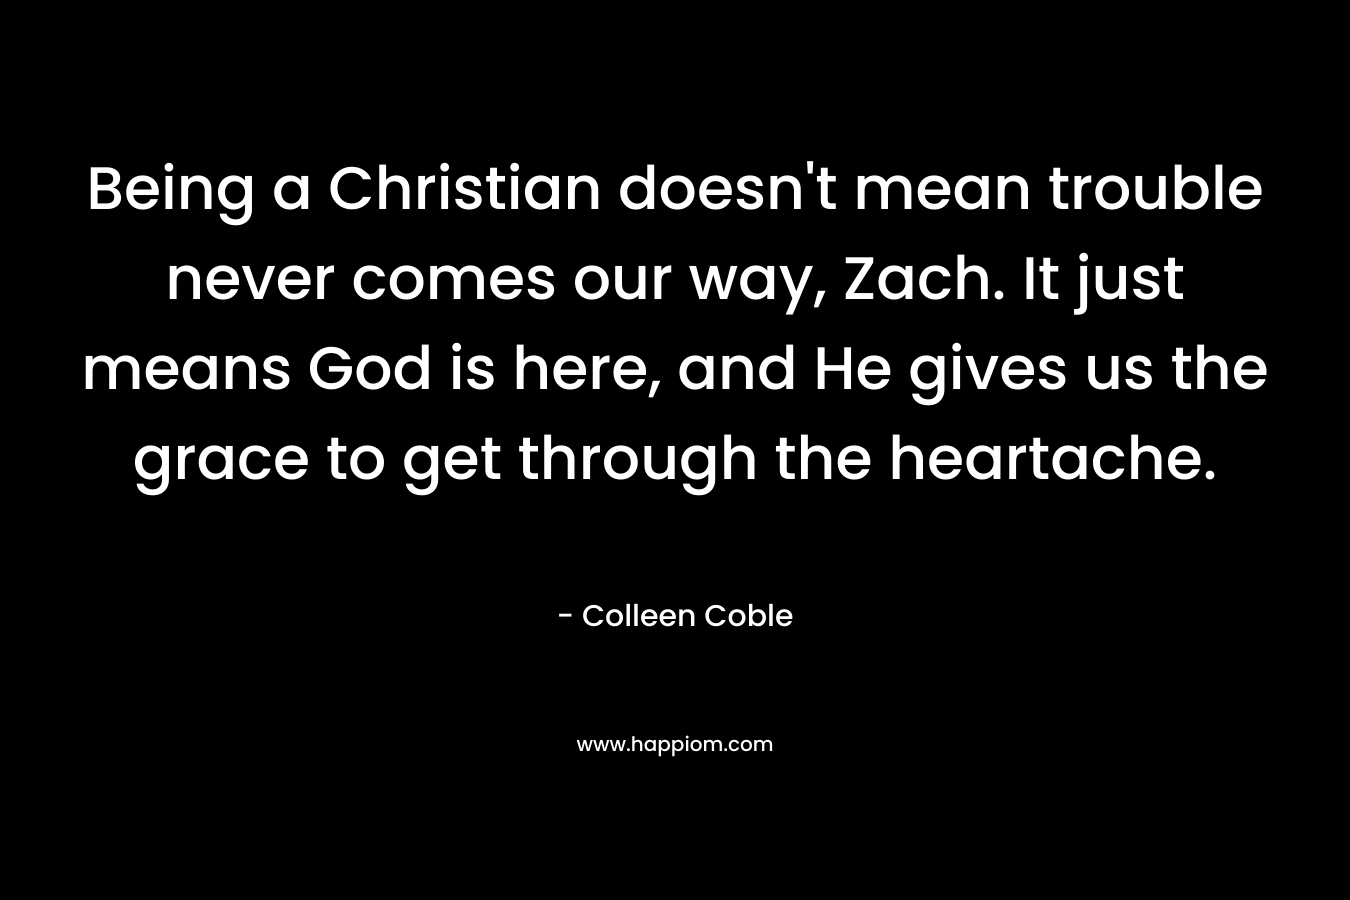 Being a Christian doesn't mean trouble never comes our way, Zach. It just means God is here, and He gives us the grace to get through the heartache.